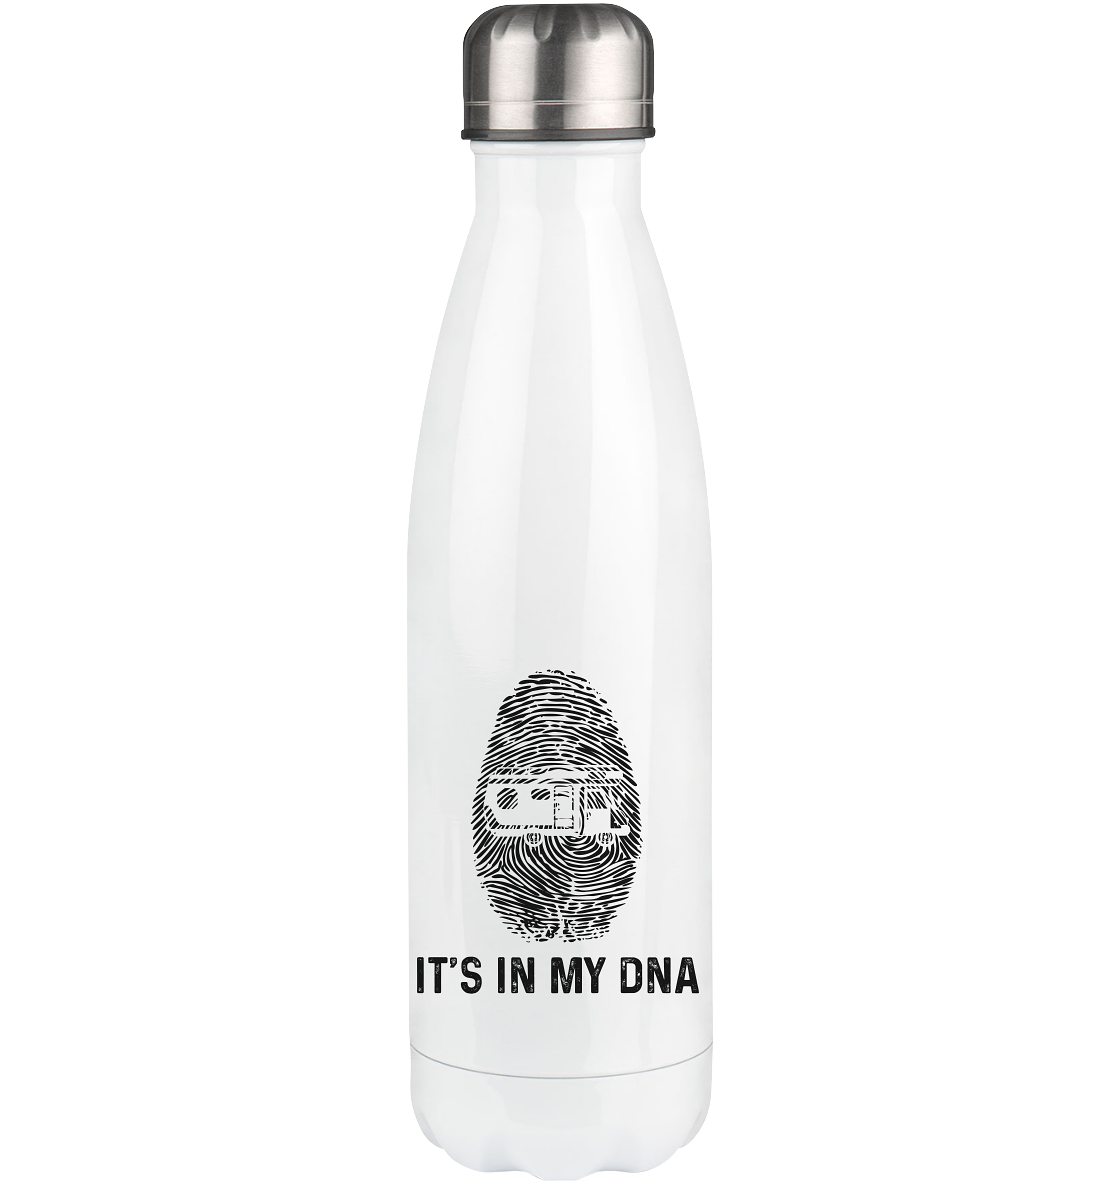 It's In My DNA - Edelstahl Thermosflasche camping UONP 500ml